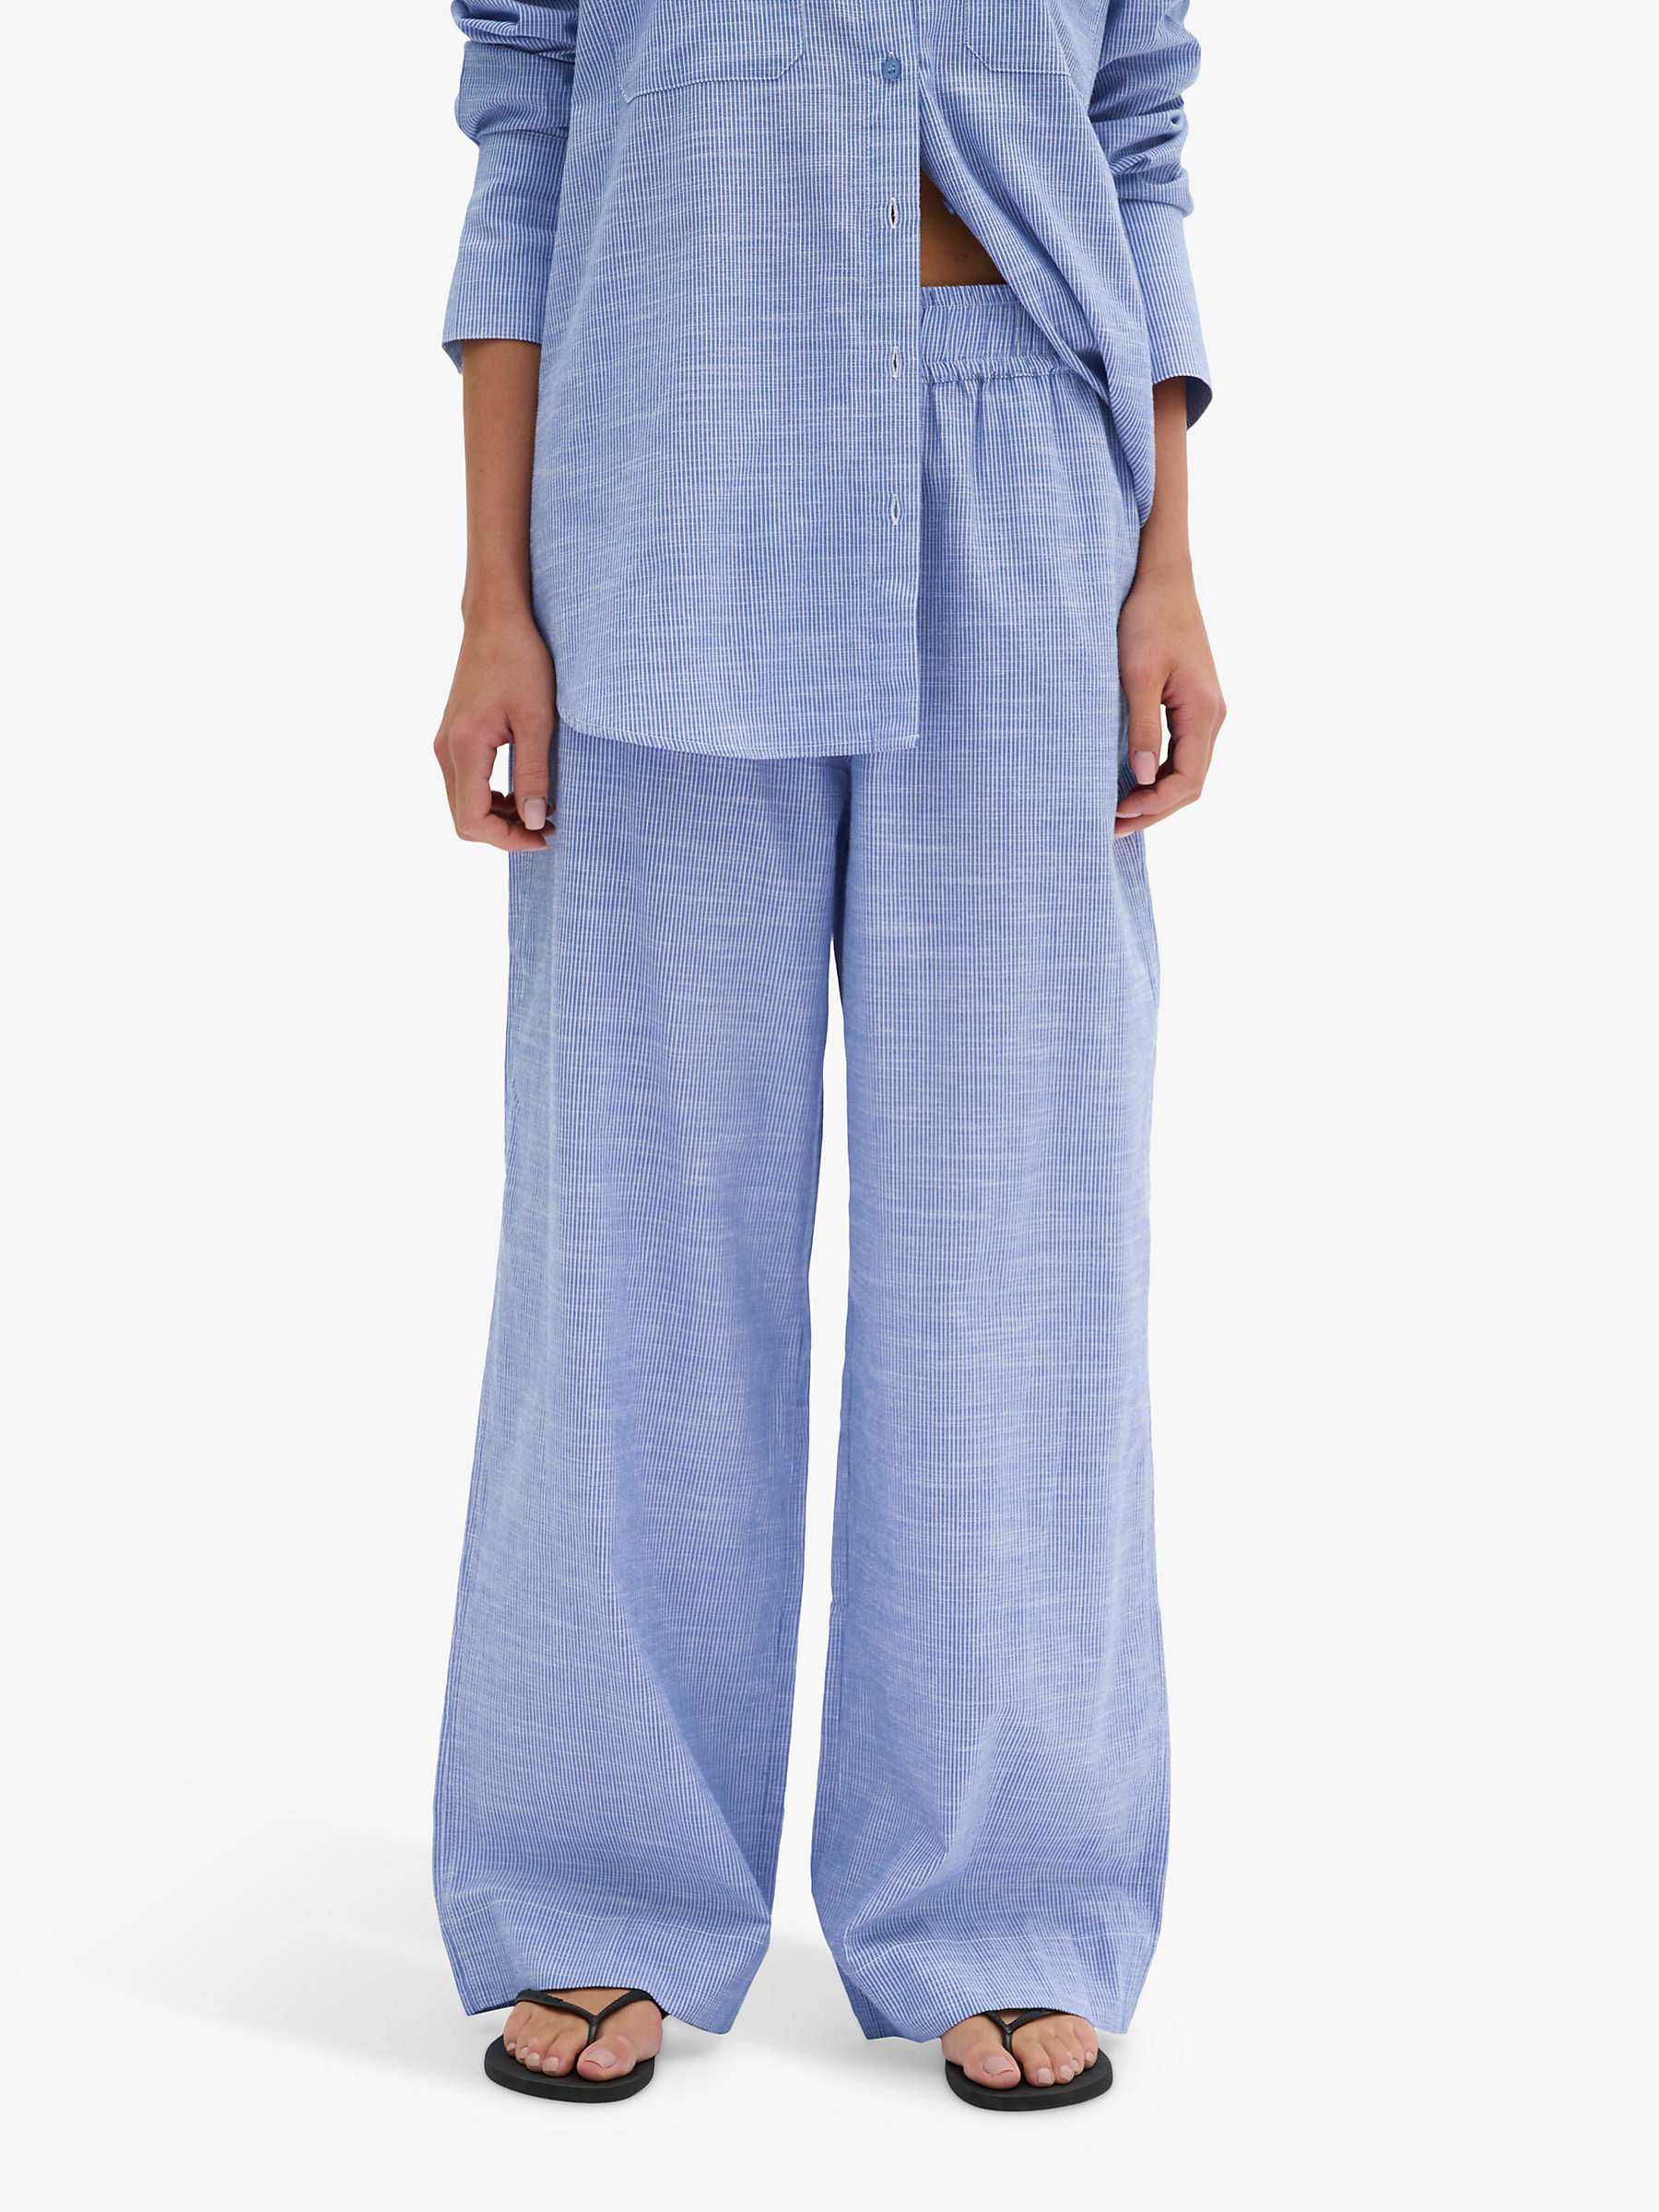 Buy MY ESSENTIAL WARDROBE Skye High Waisted Wide Leg Trousers, Delft Blue Striped Online at johnlewis.com